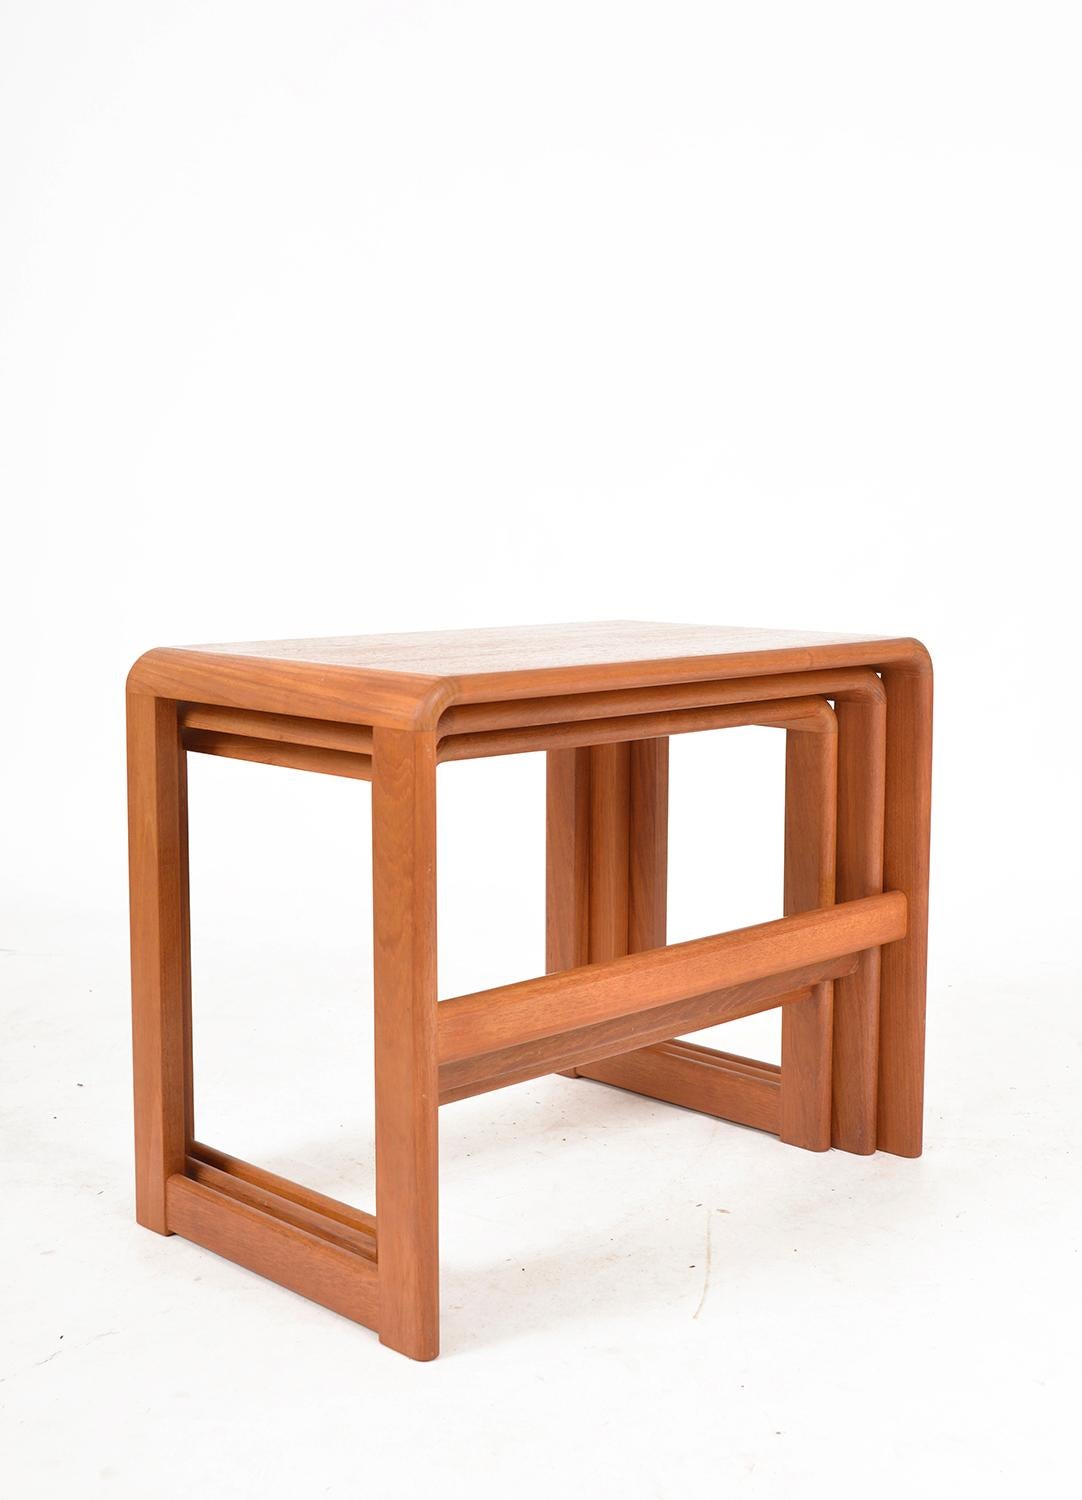 Midcentury Teak Nesting Occasional Tables by O'Donnell Design Irish 1970s Danish For Sale 1